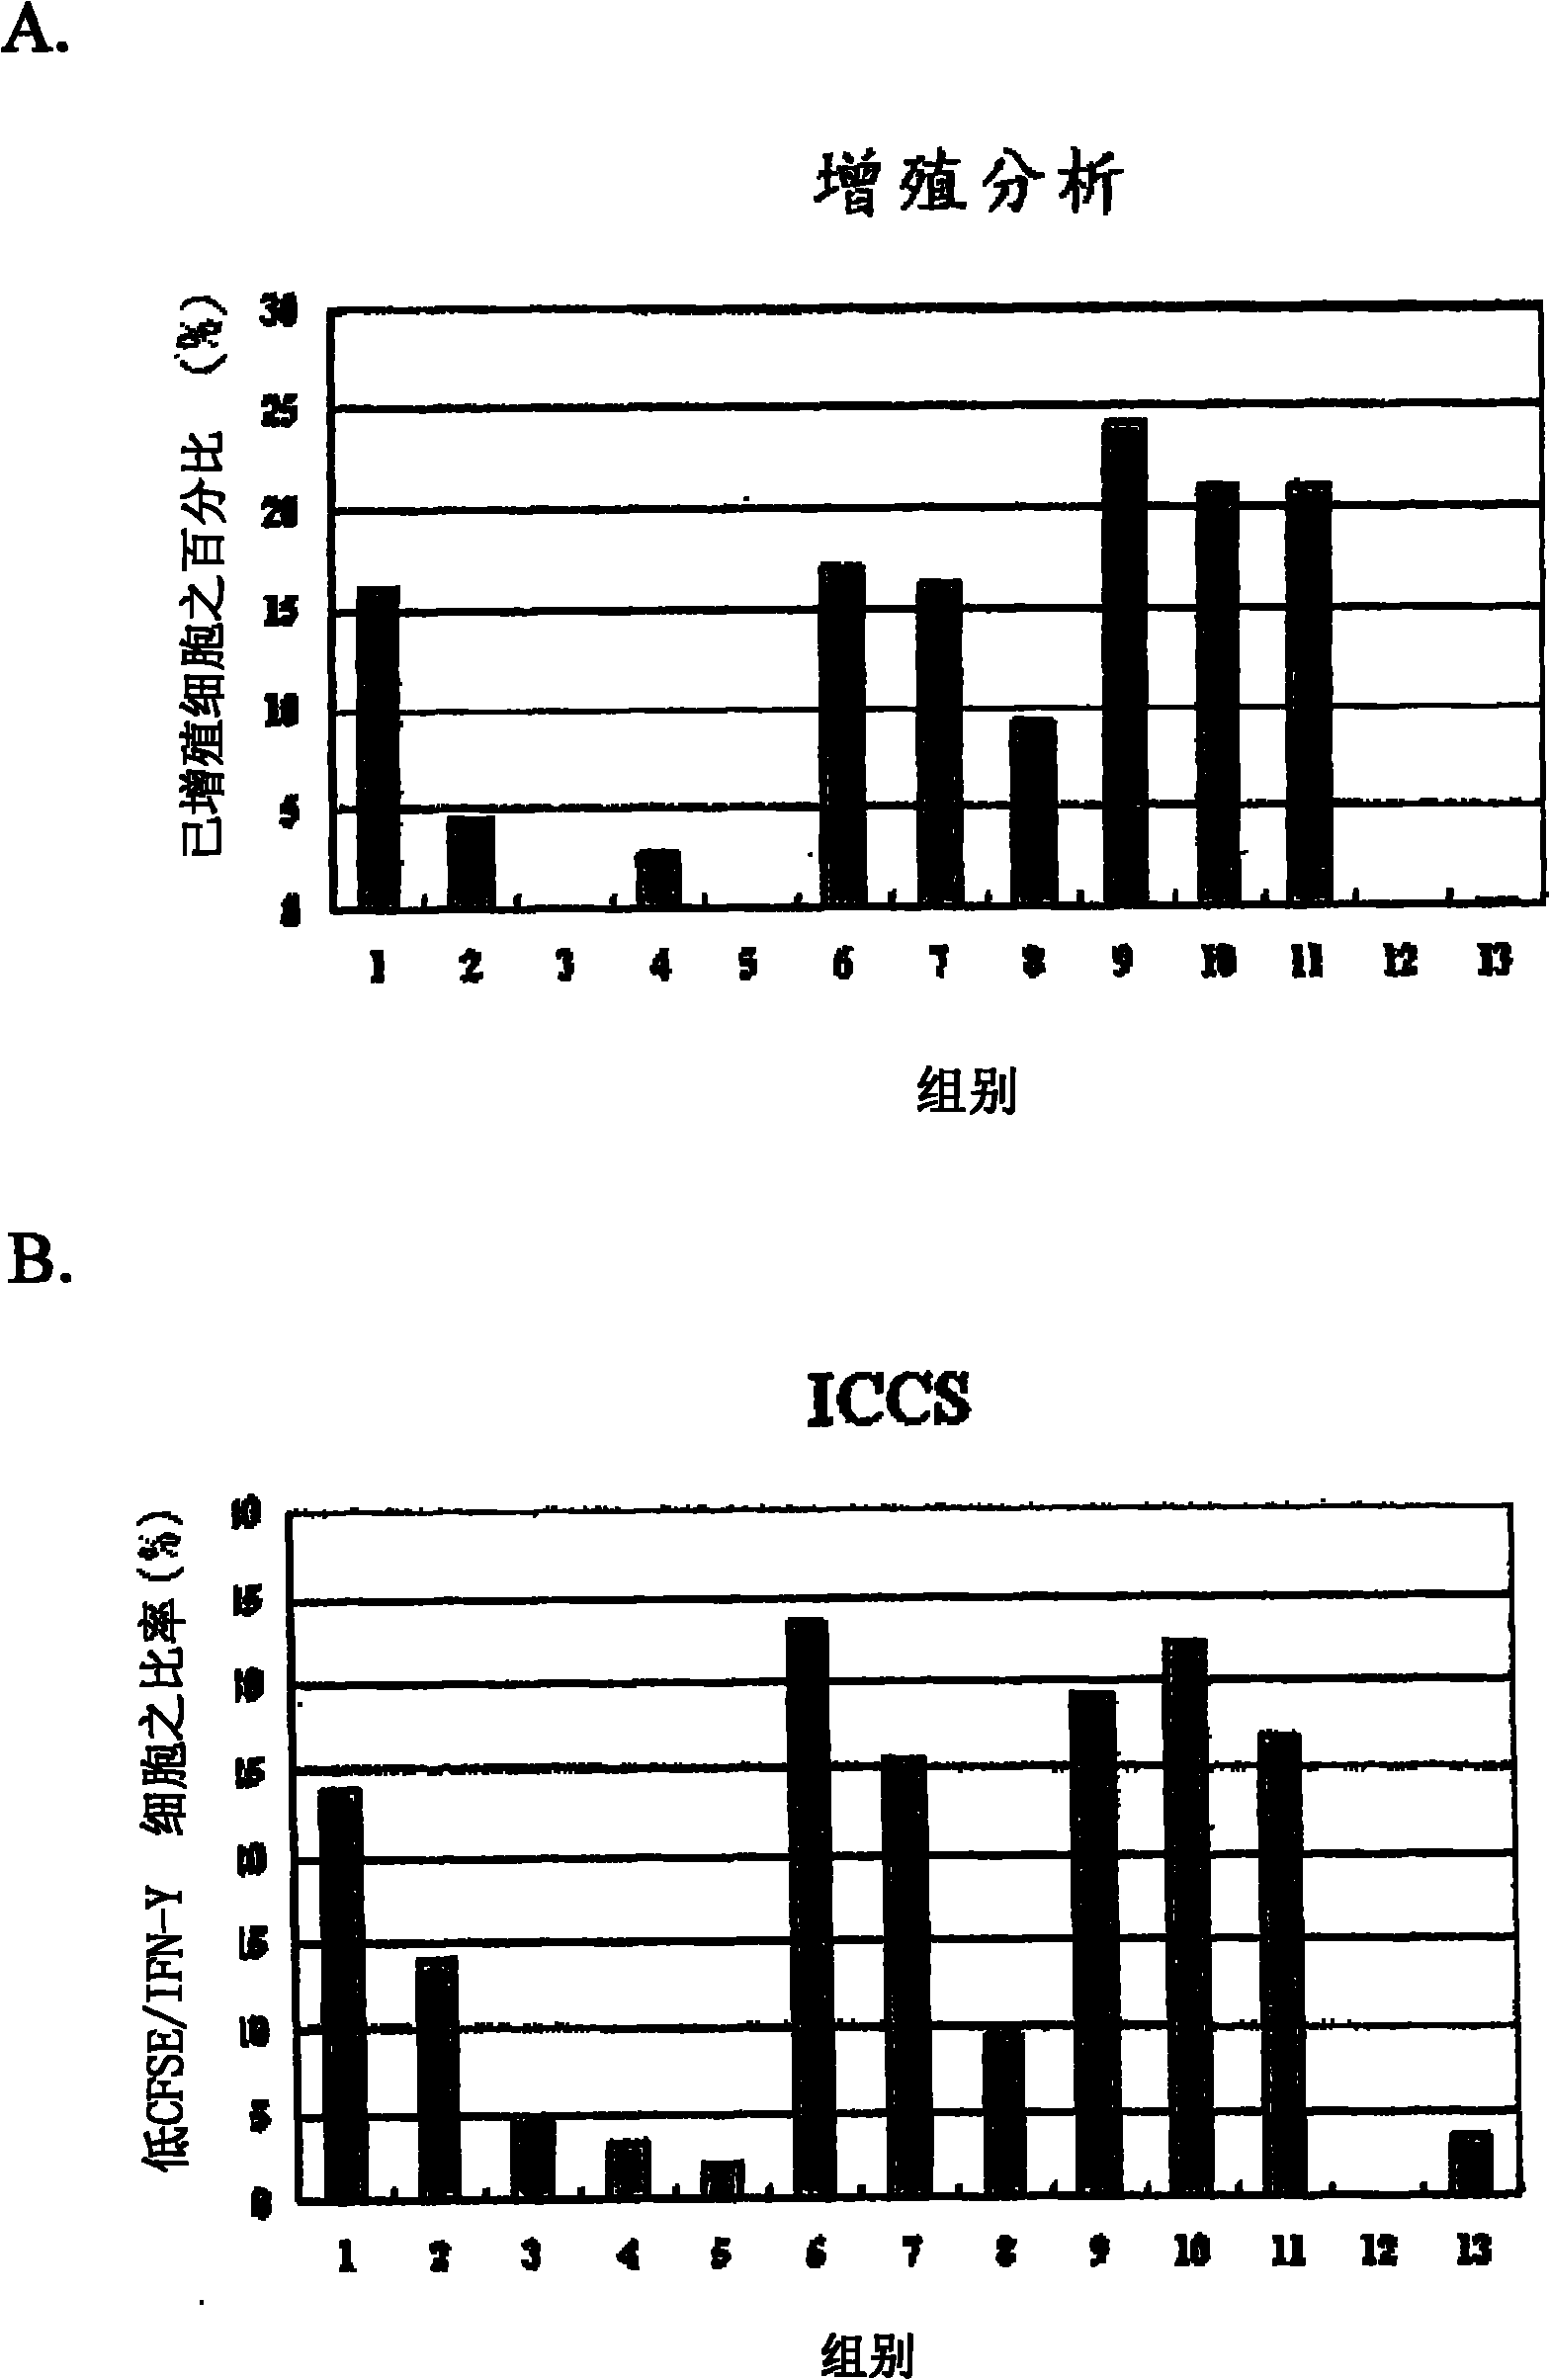 Immunogen composition containing polypeptide derived from cytomegalovirus and use method thereof